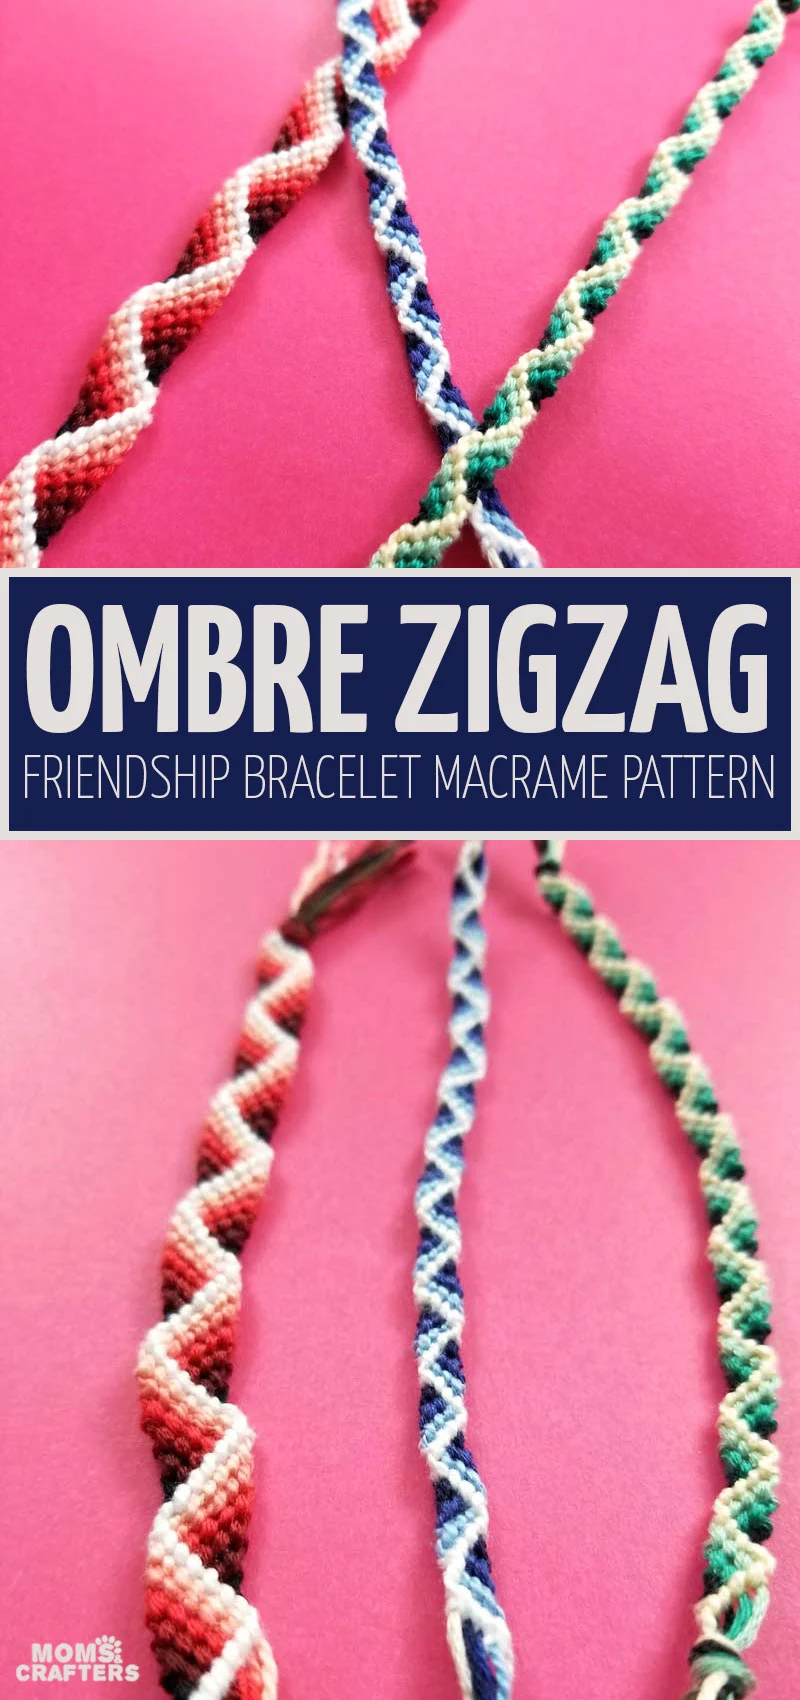 Click for a beautiful zig zag friendship bracelet pattern - an ombre macrame bracelet with a 3D ribbon effect! This stunning friendship bracelet knotting tutorial is appropriate for tweens, teens and even adults. 